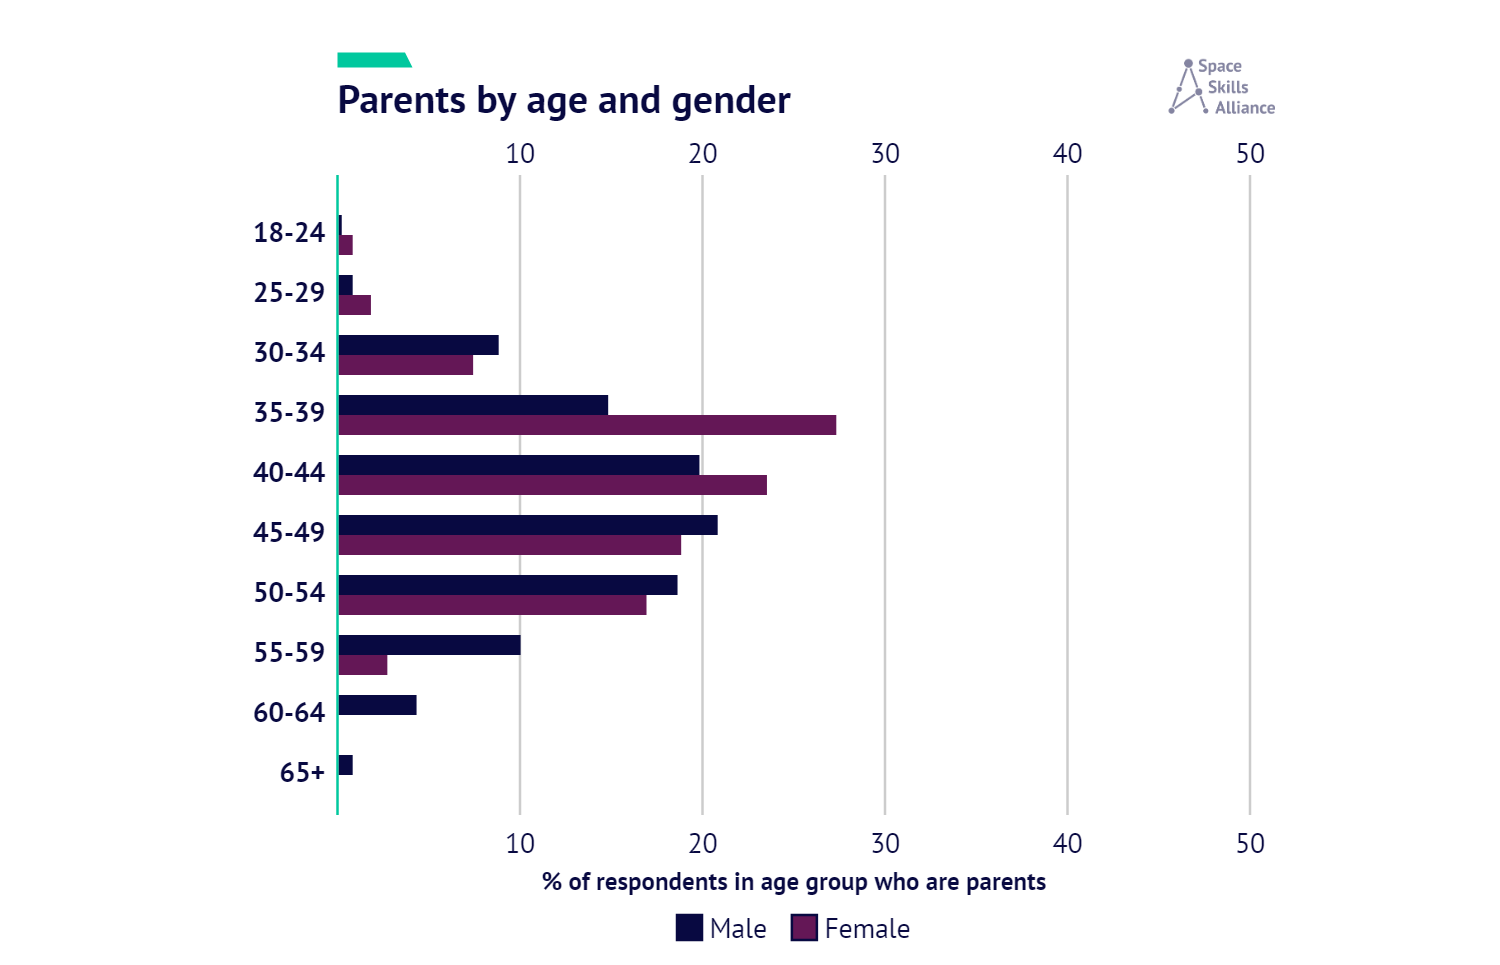 Bar chart of the percentage of male and female parents by age group. 18-24 are 0.3% male/0.9% female, 25-29 are 0.9/1.9, 30-34 are 8.9/7.5, 35-39 are 14.9/27.4, 40-44 are 19.9/23.6, 45-49 are 20.9/18.9, 50-54 are 18.7/17, 55-59 are 10.1/2.8, 60-64 are 4.4/0, 65+ are 0.9/0